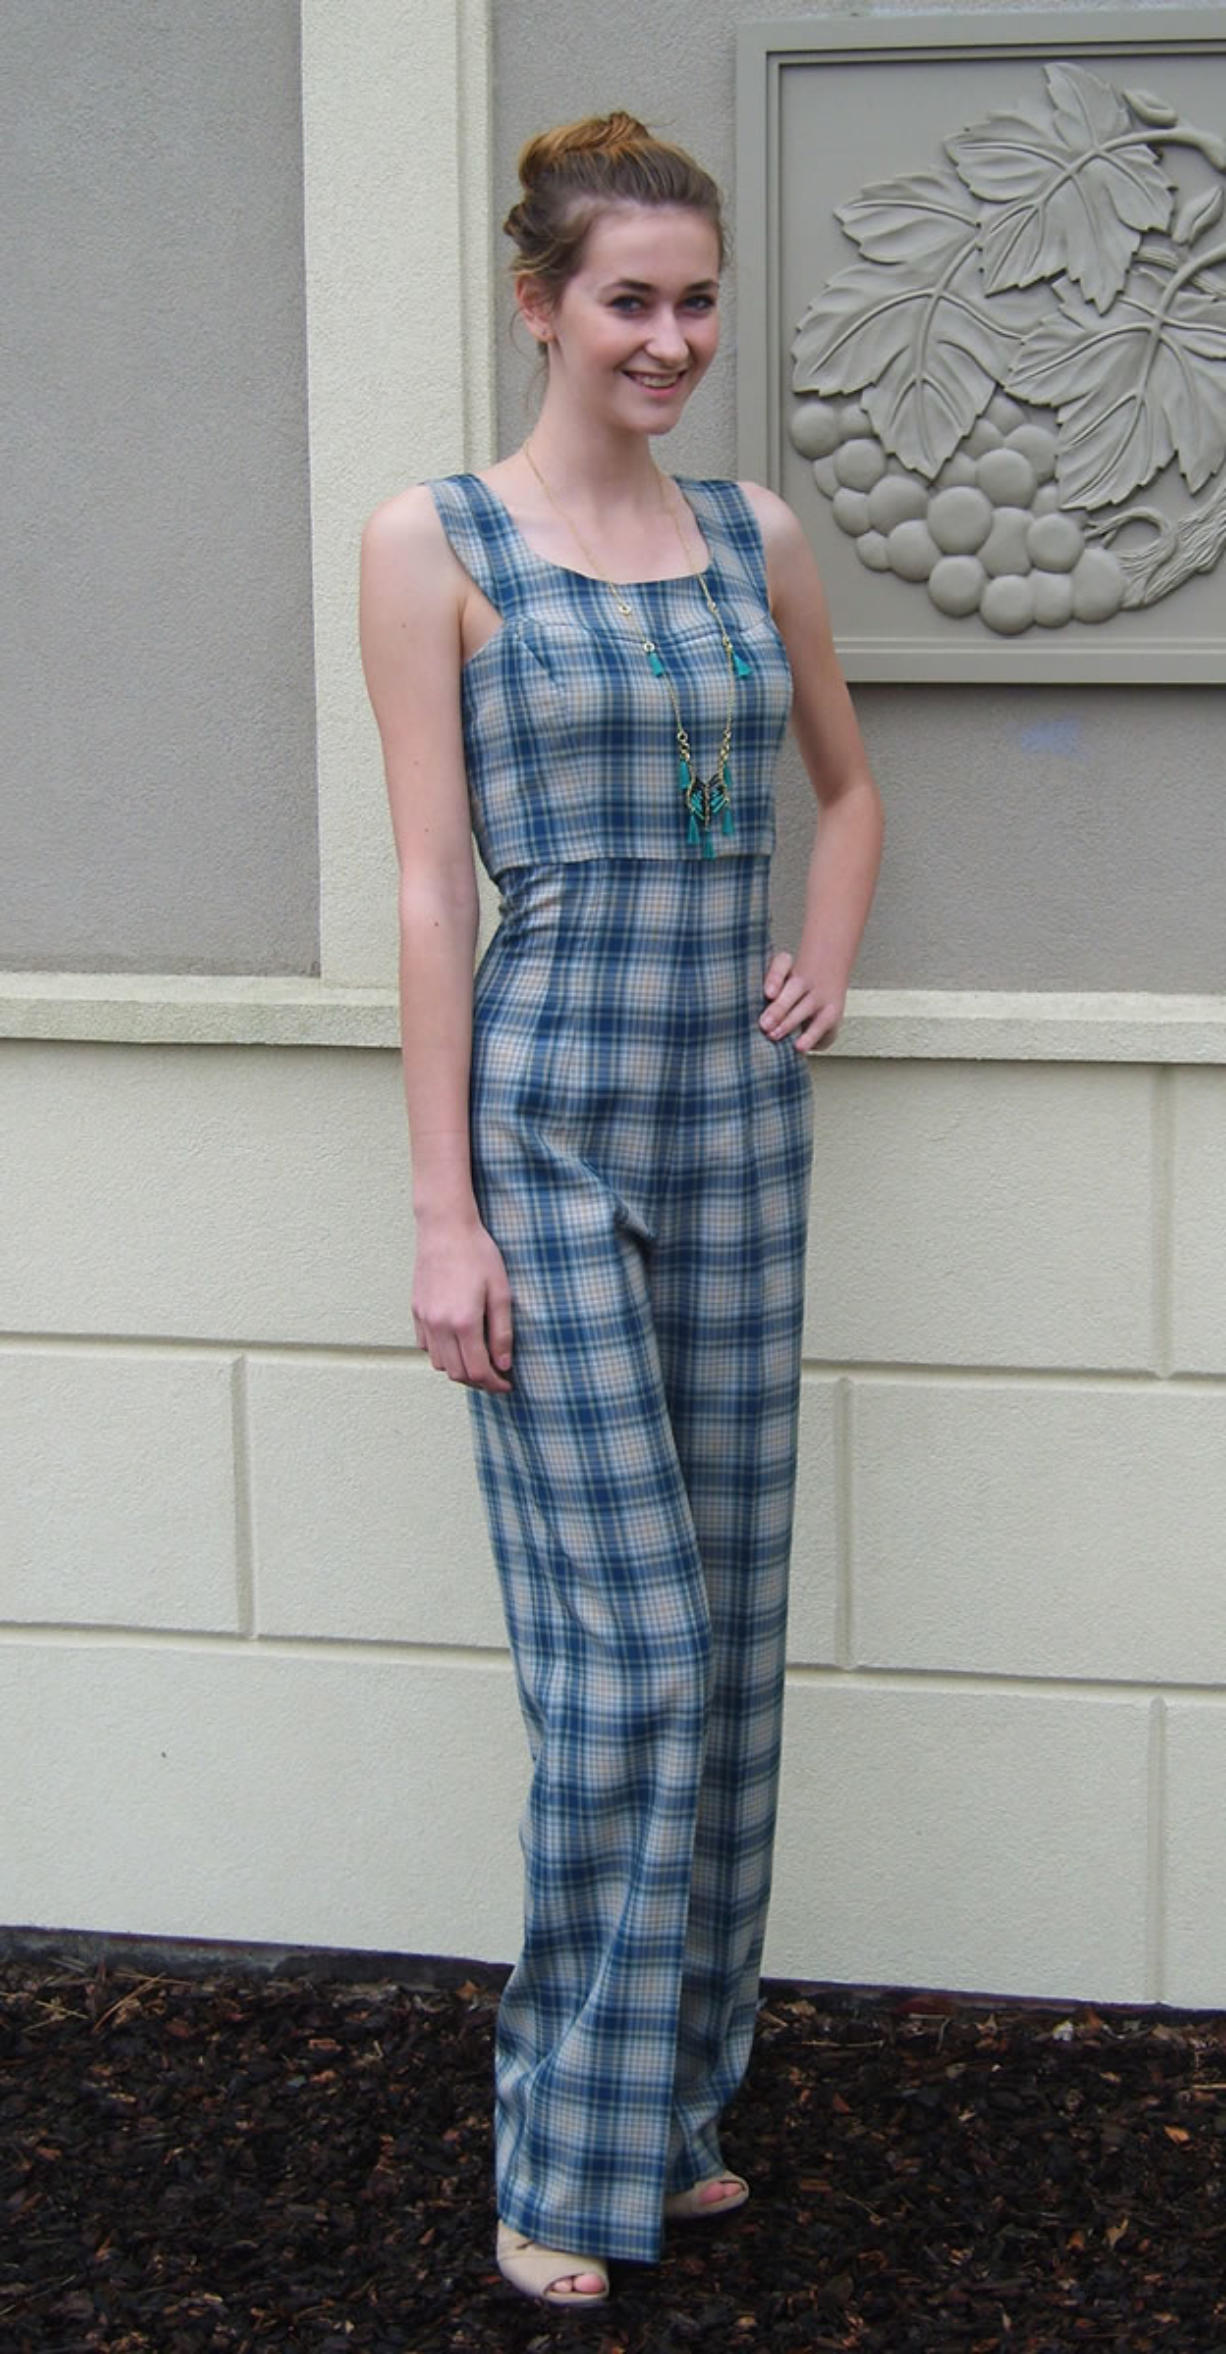 Miranda Dowler, 16, of Vancouver models the wool plaid jumpsuit she entered in the Washington State Make It With Wool Contest.